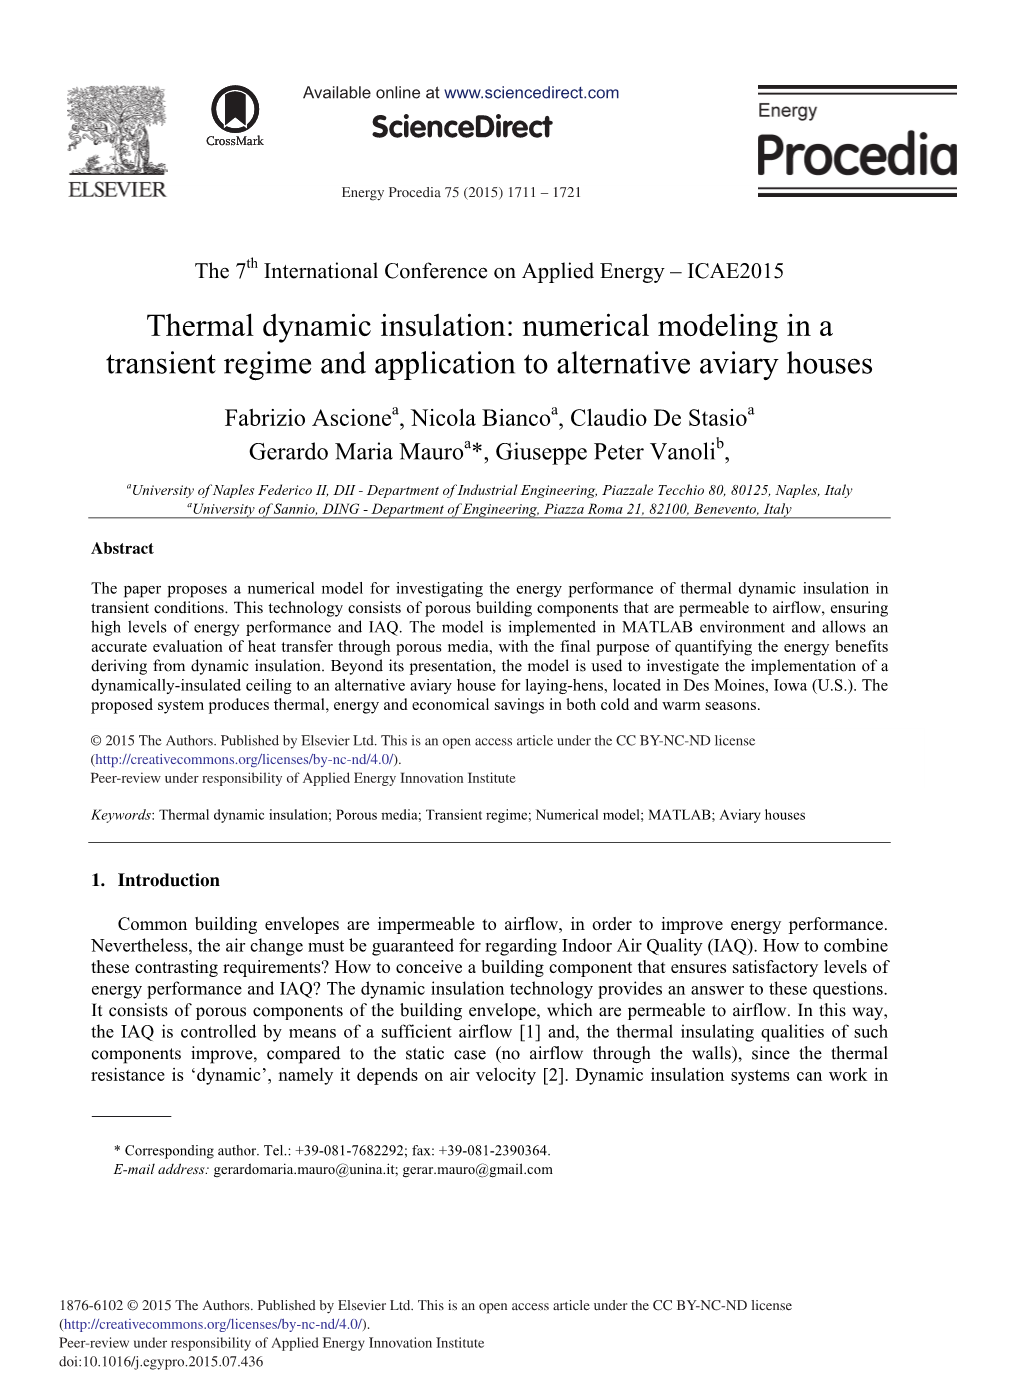 Thermal Dynamic Insulation: Numerical Modeling in a Transient Regime and Application to Alternative Aviary Houses